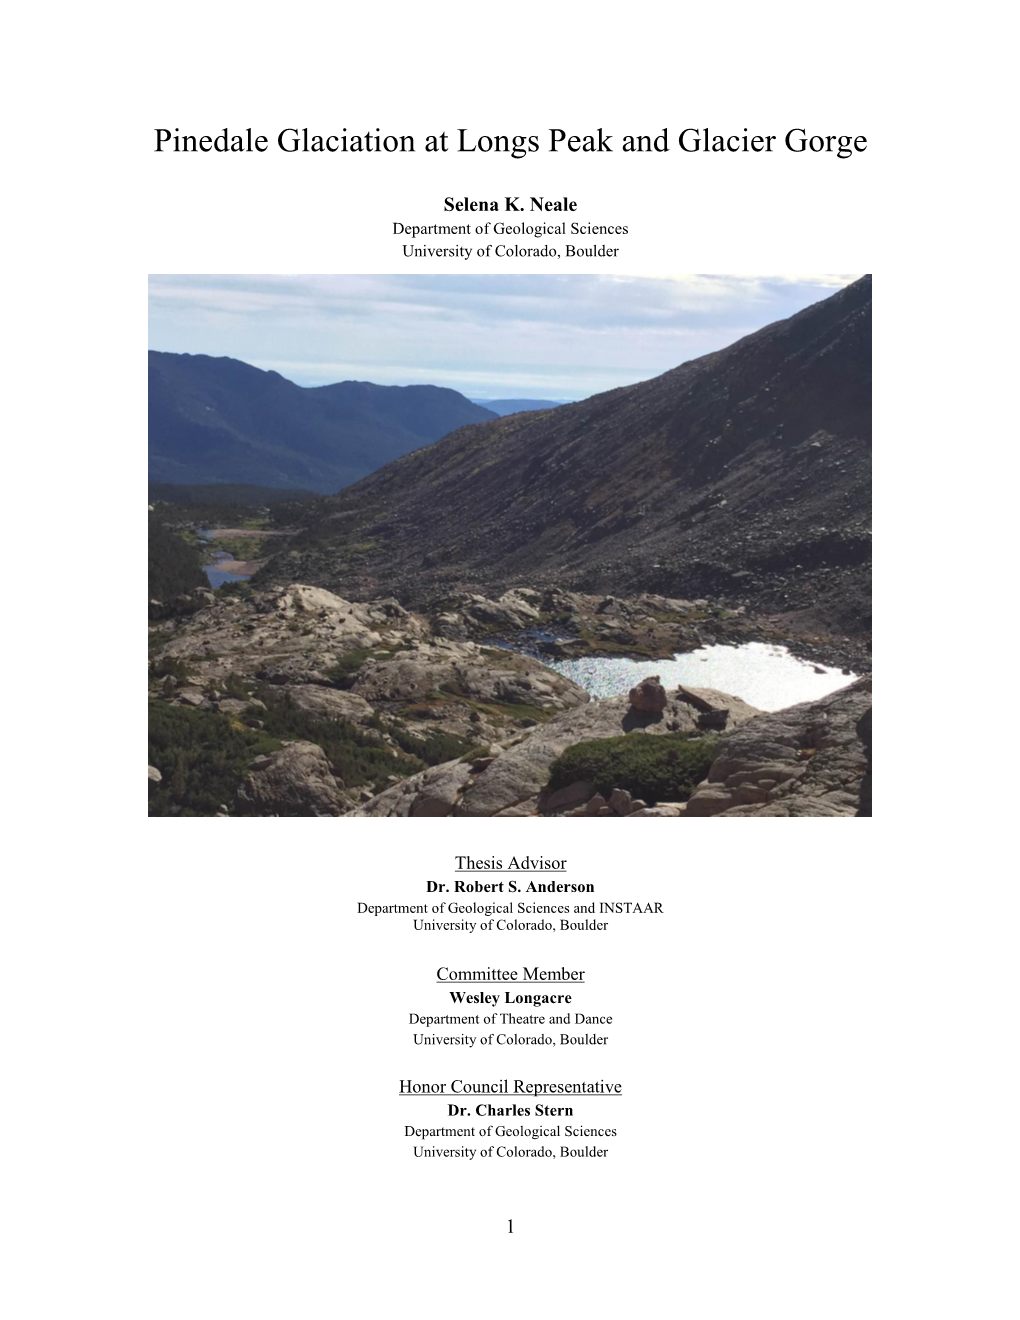 Pinedale Glaciation at Longs Peak and Glacier Gorge